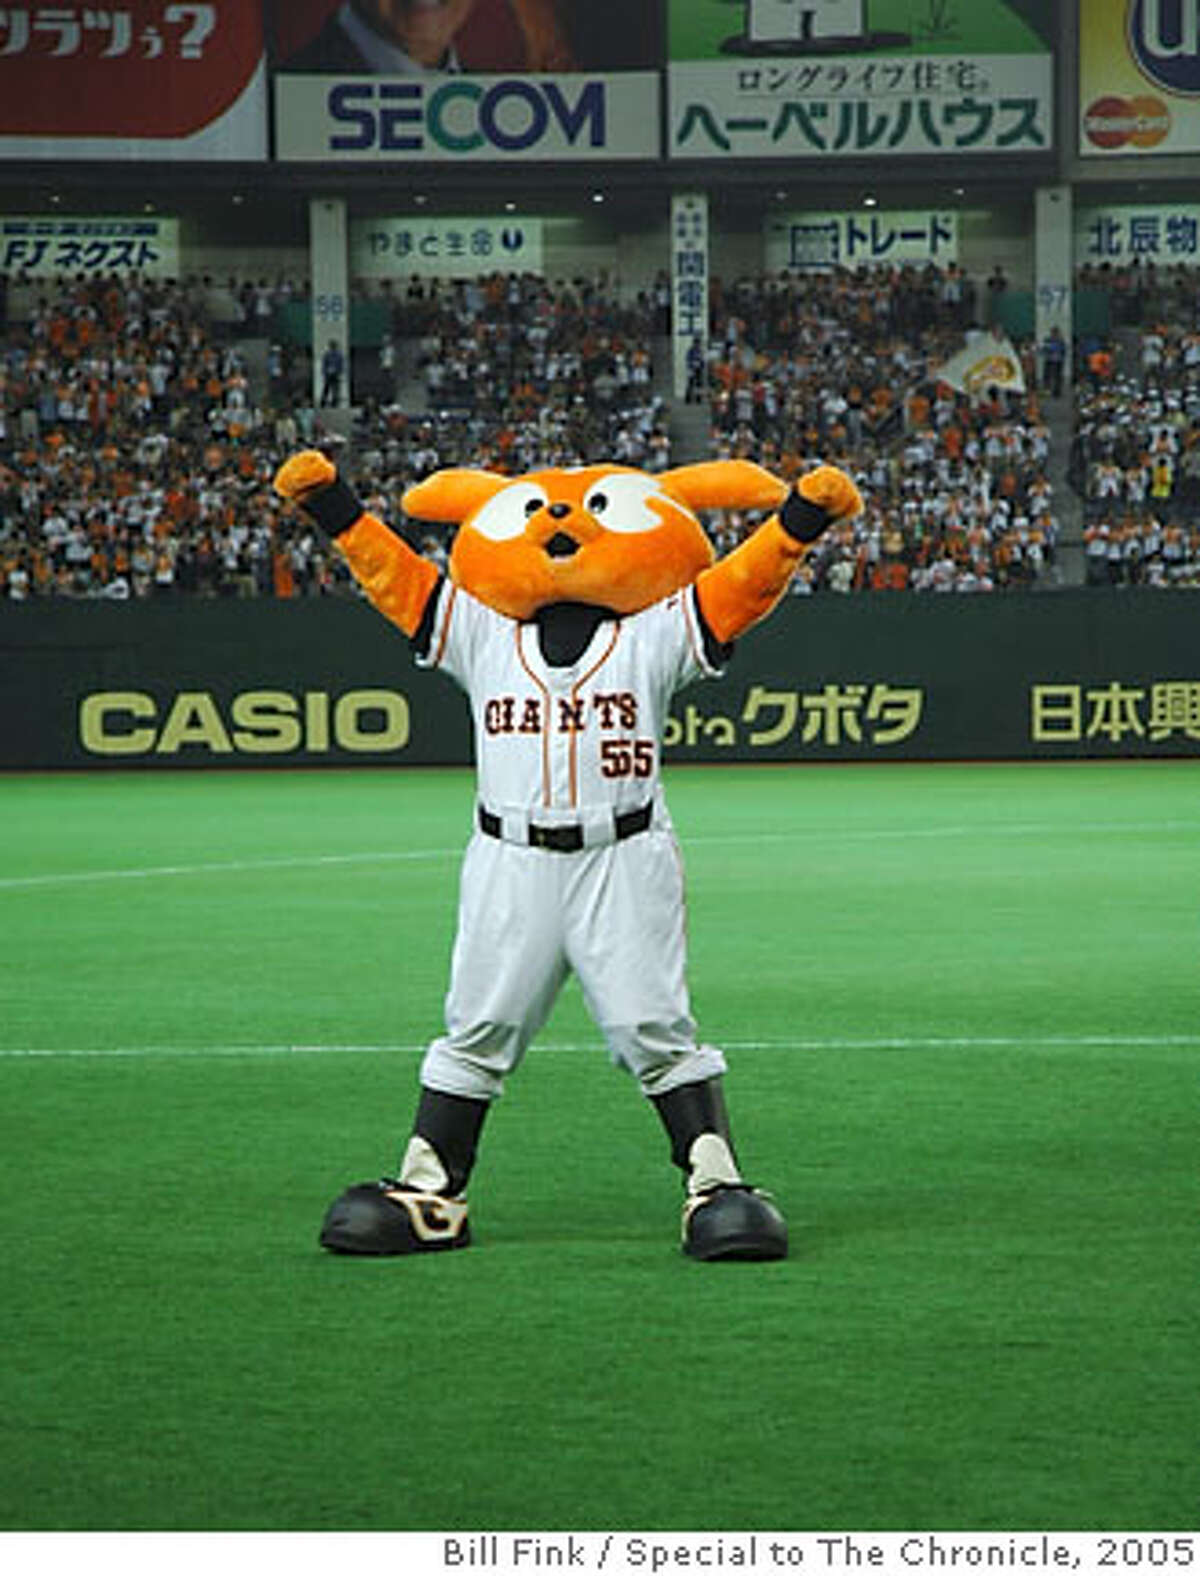 TRAVEL JAPAN BASEBALL -- Giabbit, the mascot of the Yomiuri Giants, performs for the crowd. Bill Fink / Special to the Chronicle One-time use only with Travel story (SFGate OK if also used in print.)